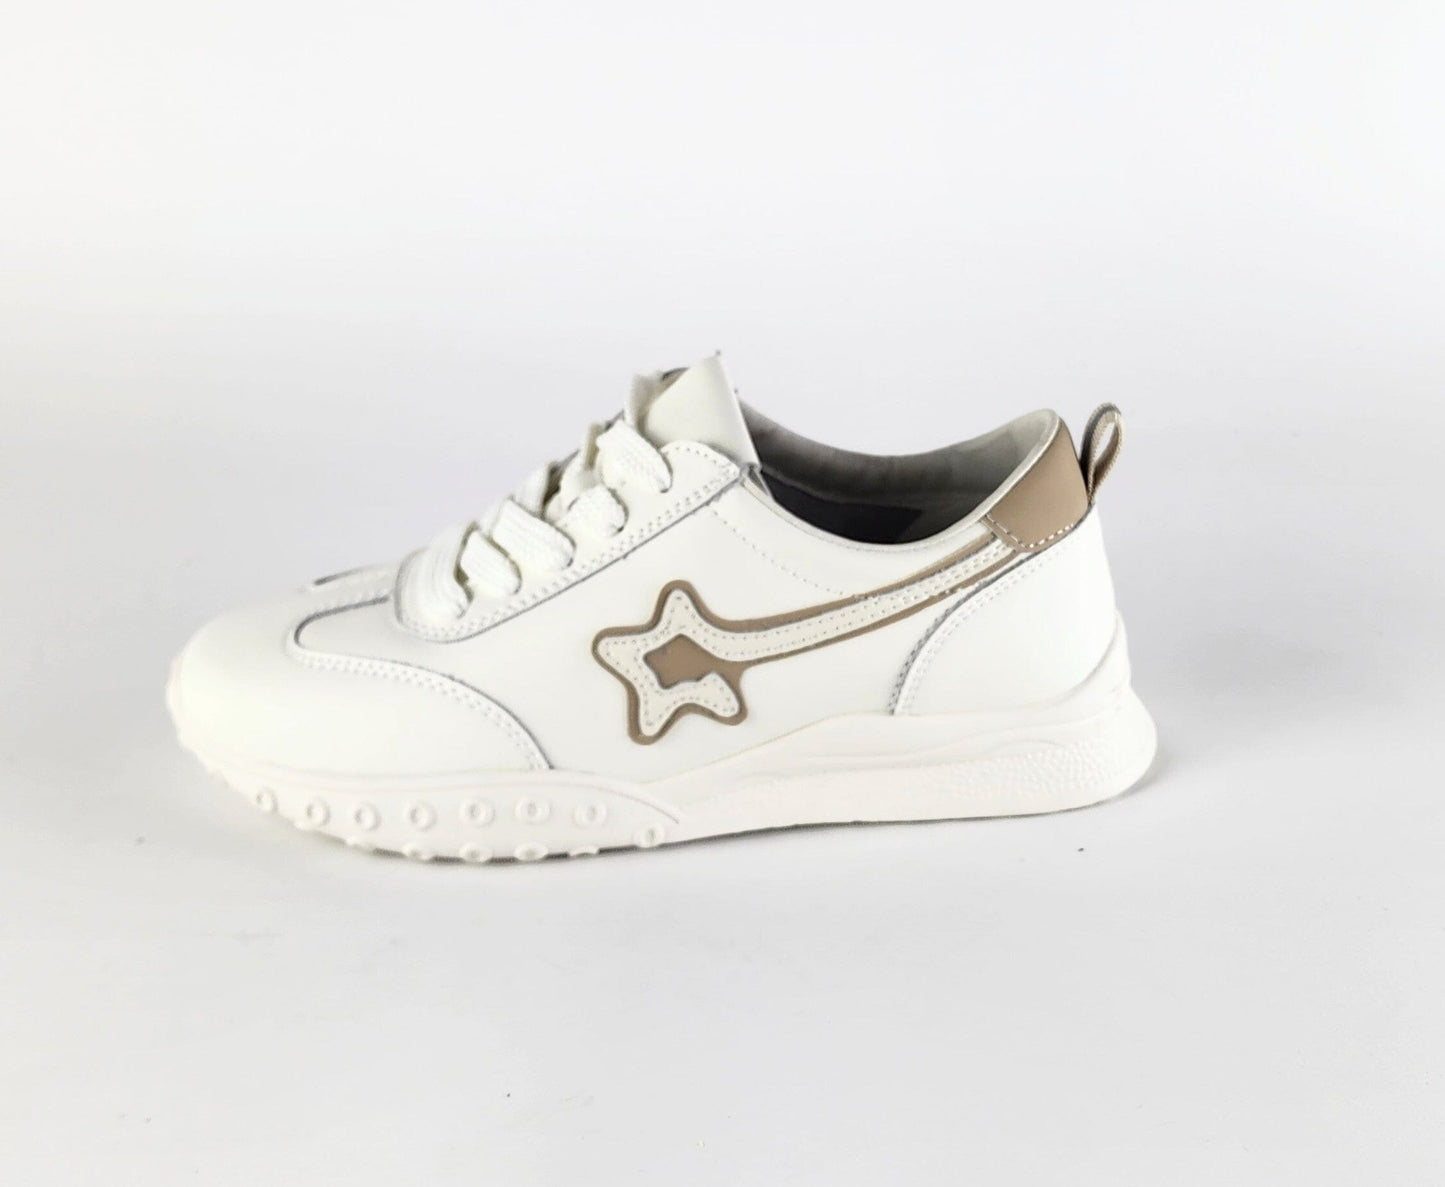 SS23009 White leather sneakers with star and flexible sole sneakers Sam Star Shoes Tan 38 